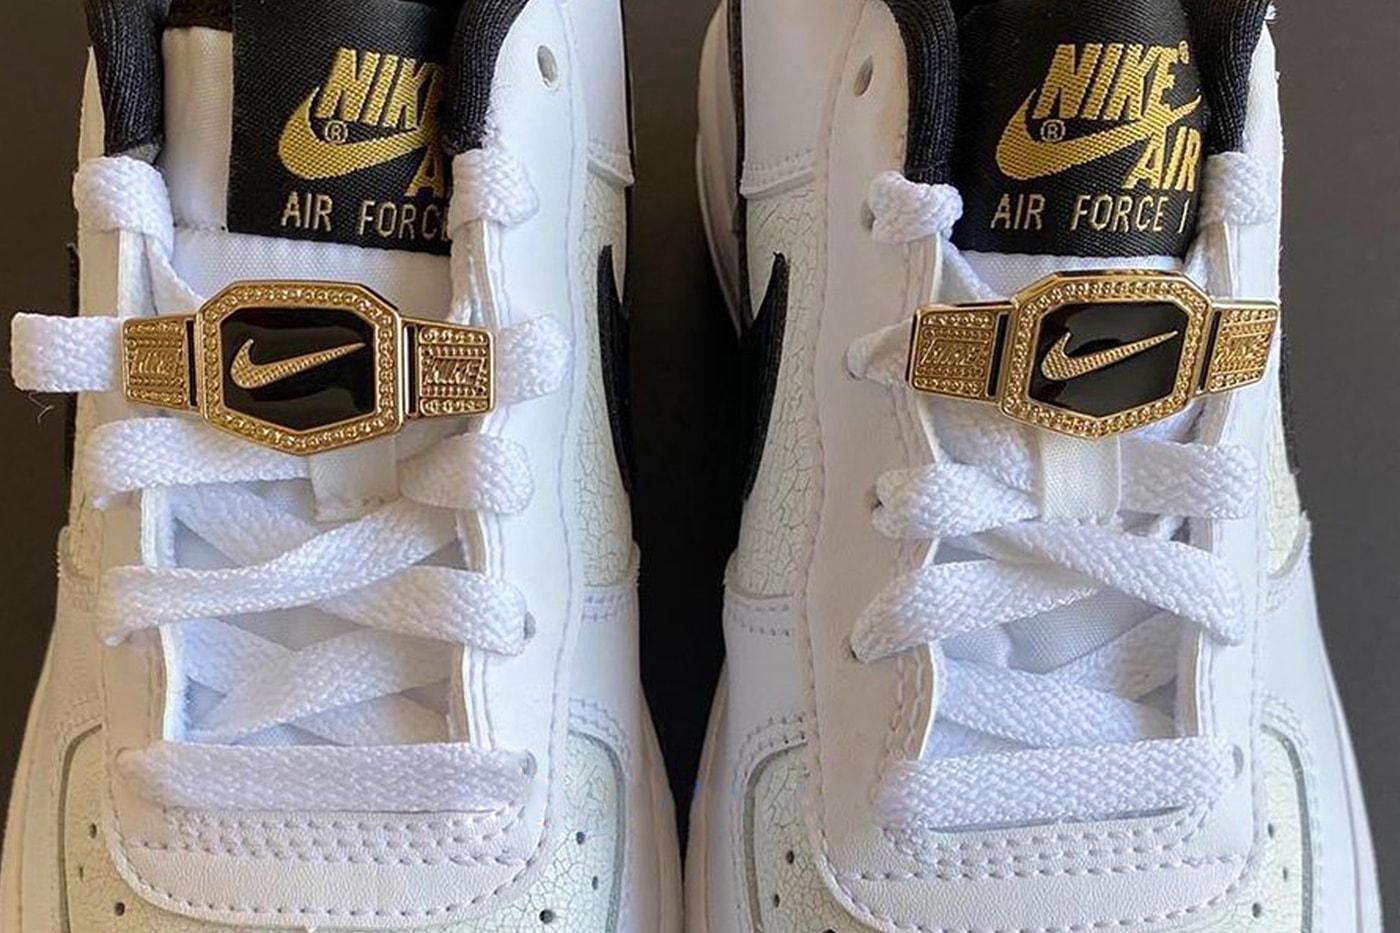 Nike Air Force 1 World Champ First Look